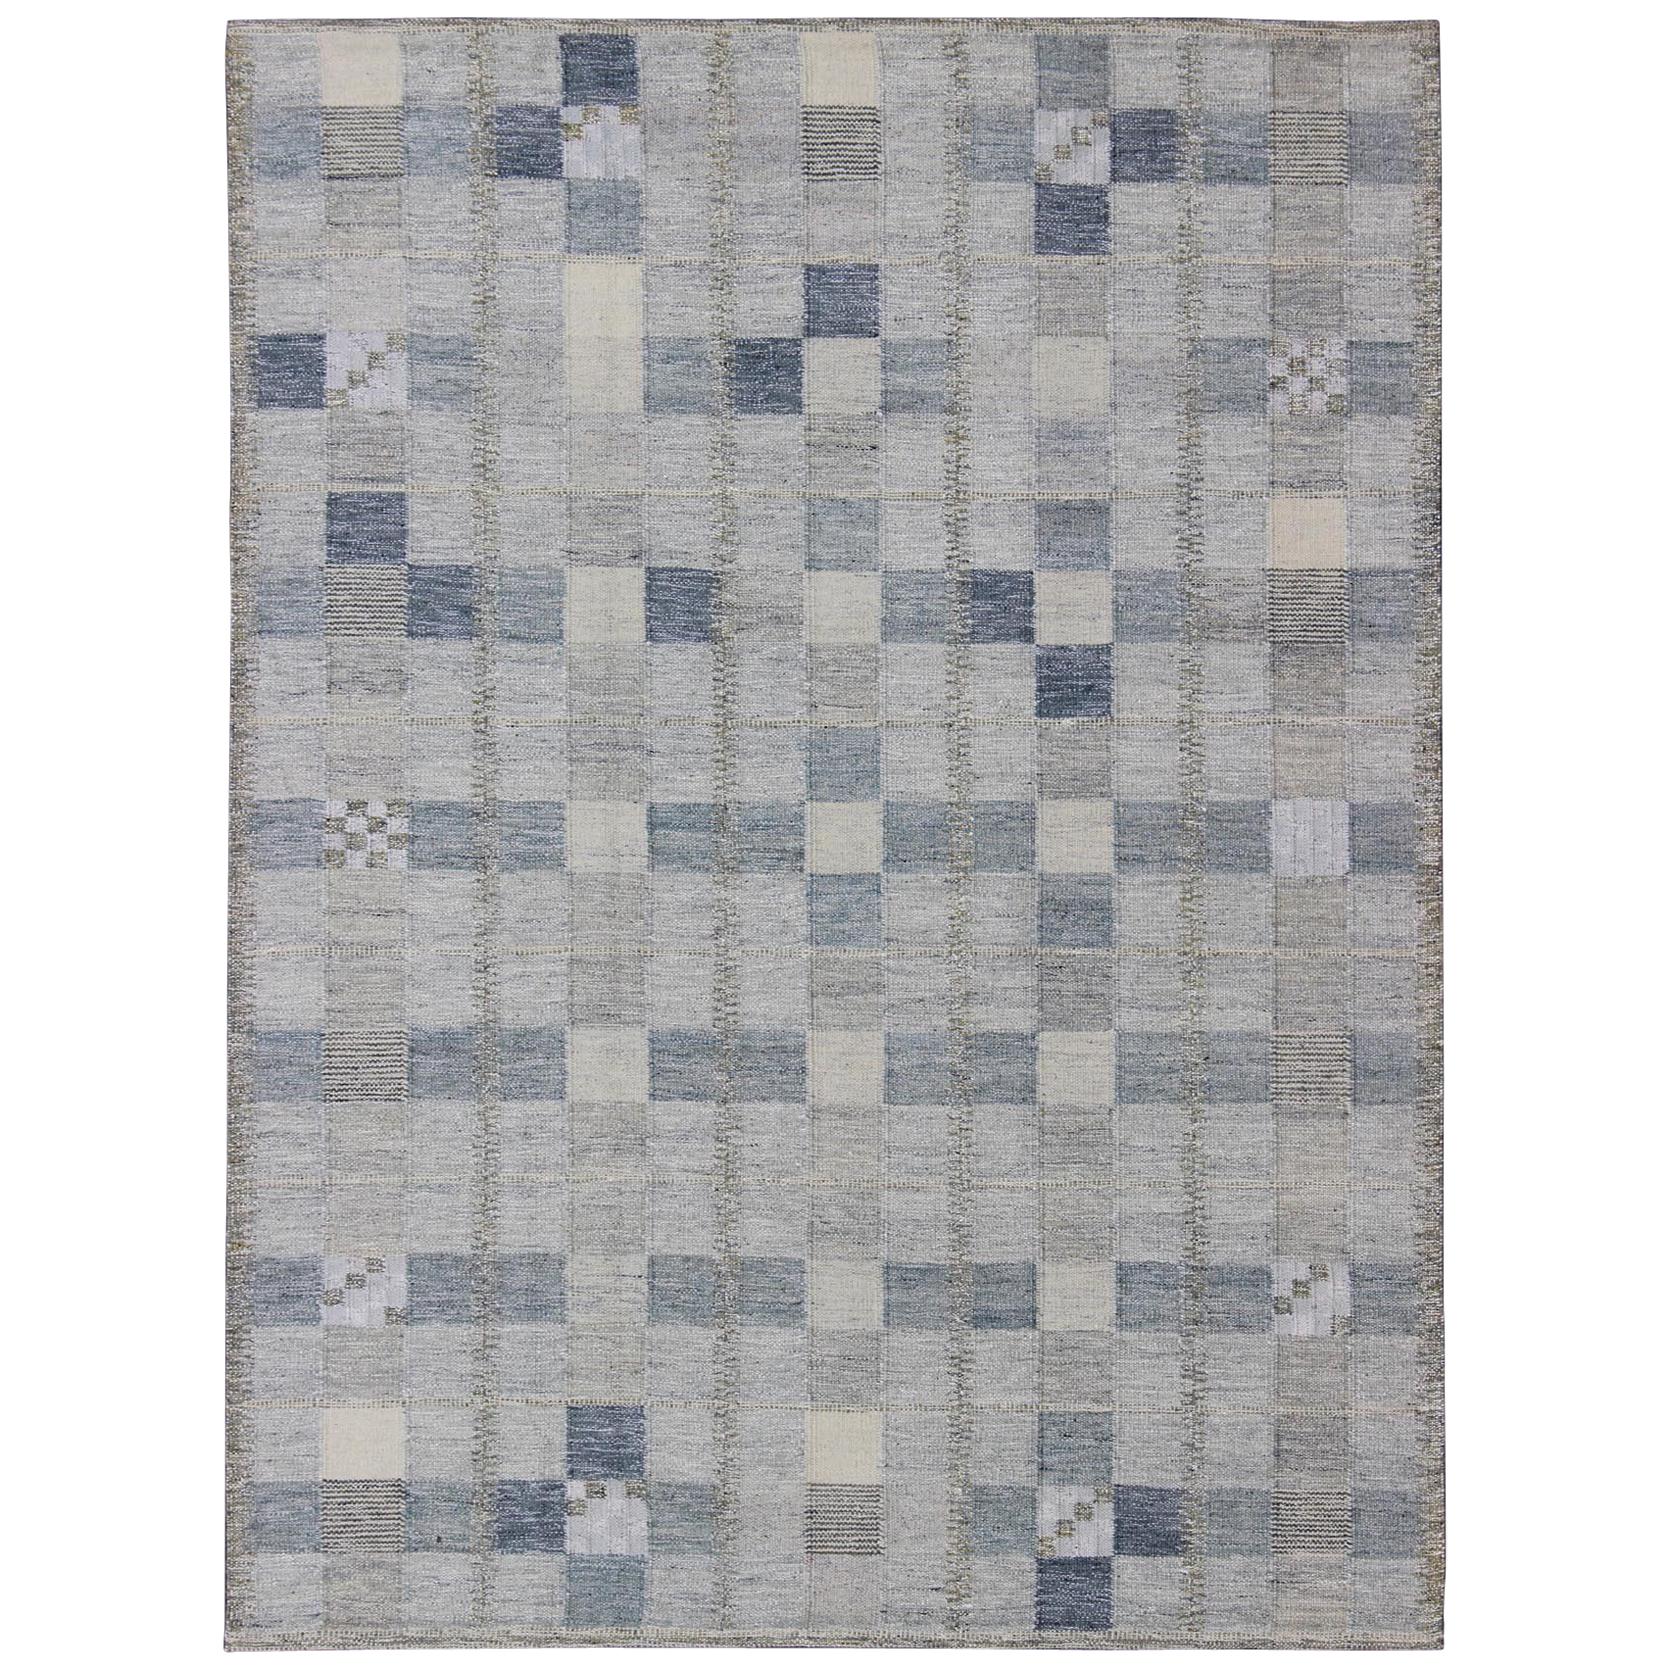 Scandinavian Flat-Weave Design Rug with Checkerboard Design in Gray and Blue